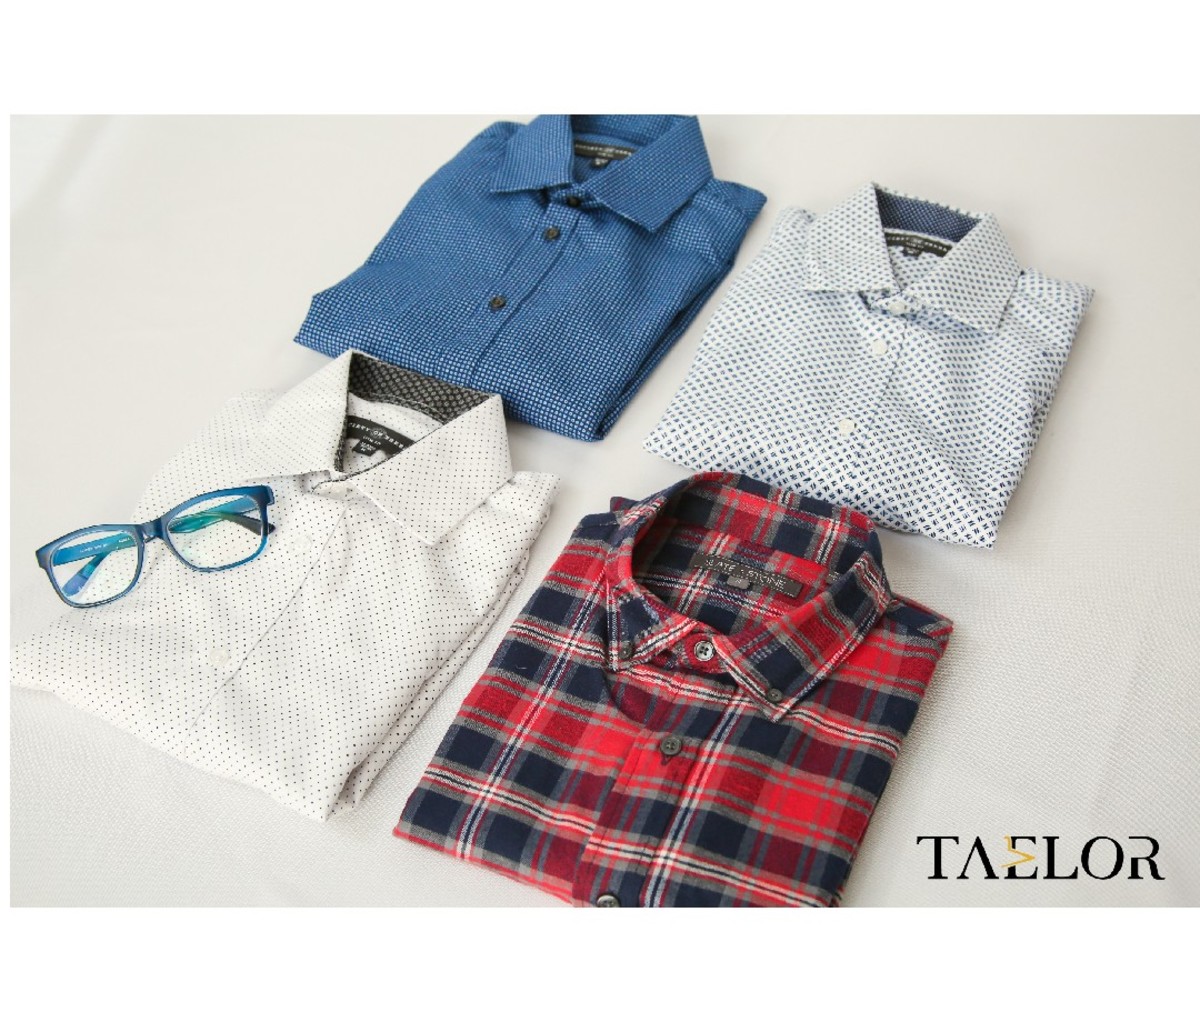 Four folded collared shirts and a pair of eyeglasses from Taelor Menswear